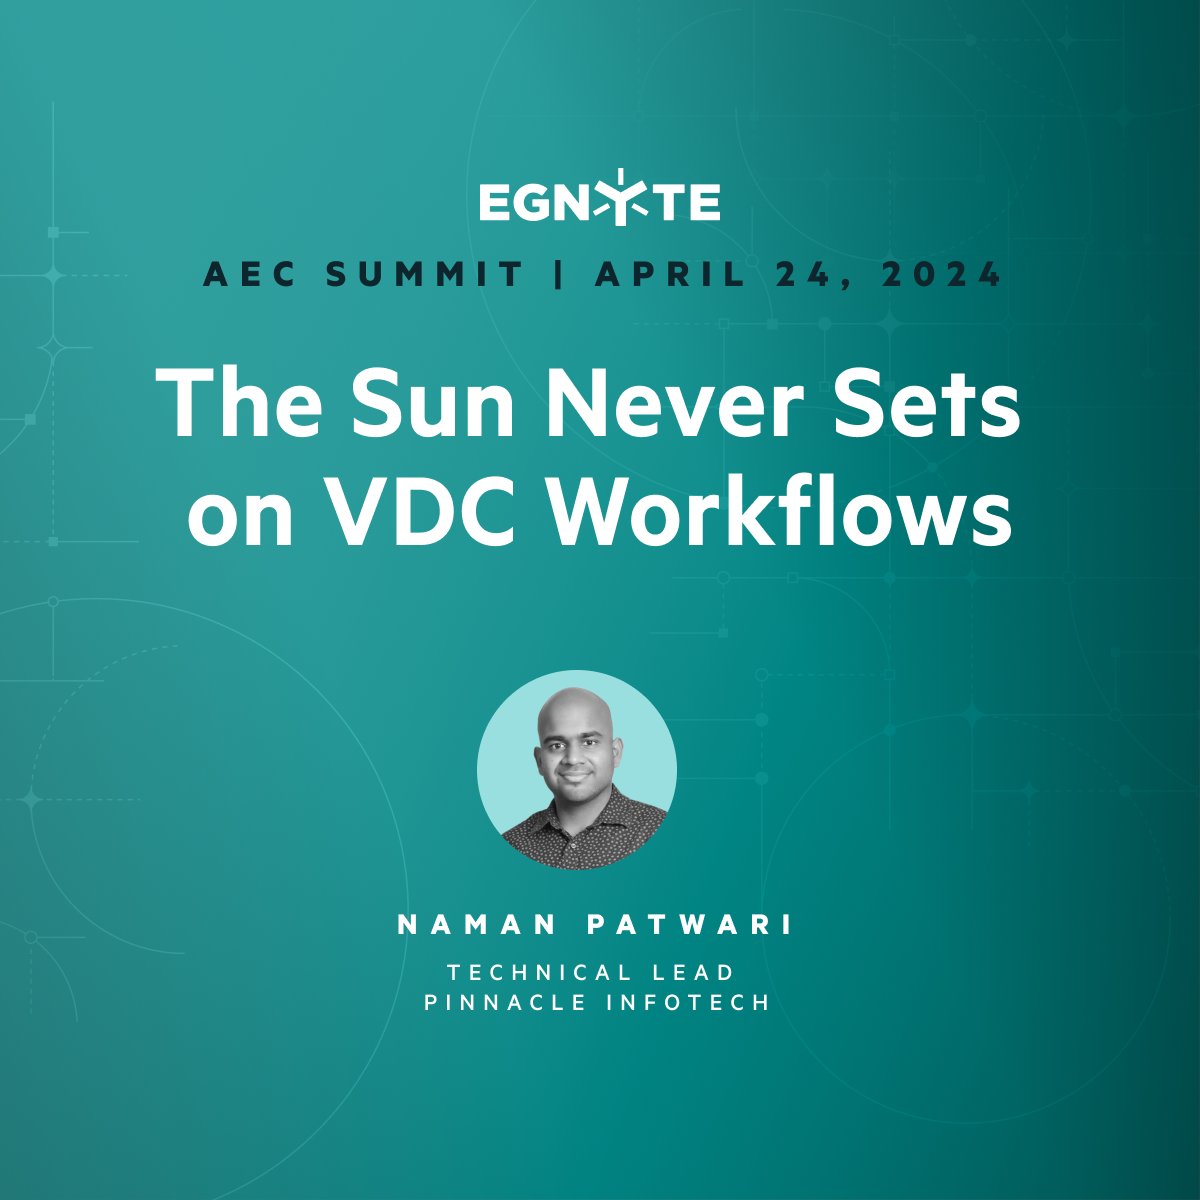 Wanna level up your VDC game? Then buckle up for our @Egnyte AEC Summit session featuring Pinnacle Infotech. Get ready for some serious global design discussions! Secure your spot and let's make VDC dreams a reality. bit.ly/3JirD3t